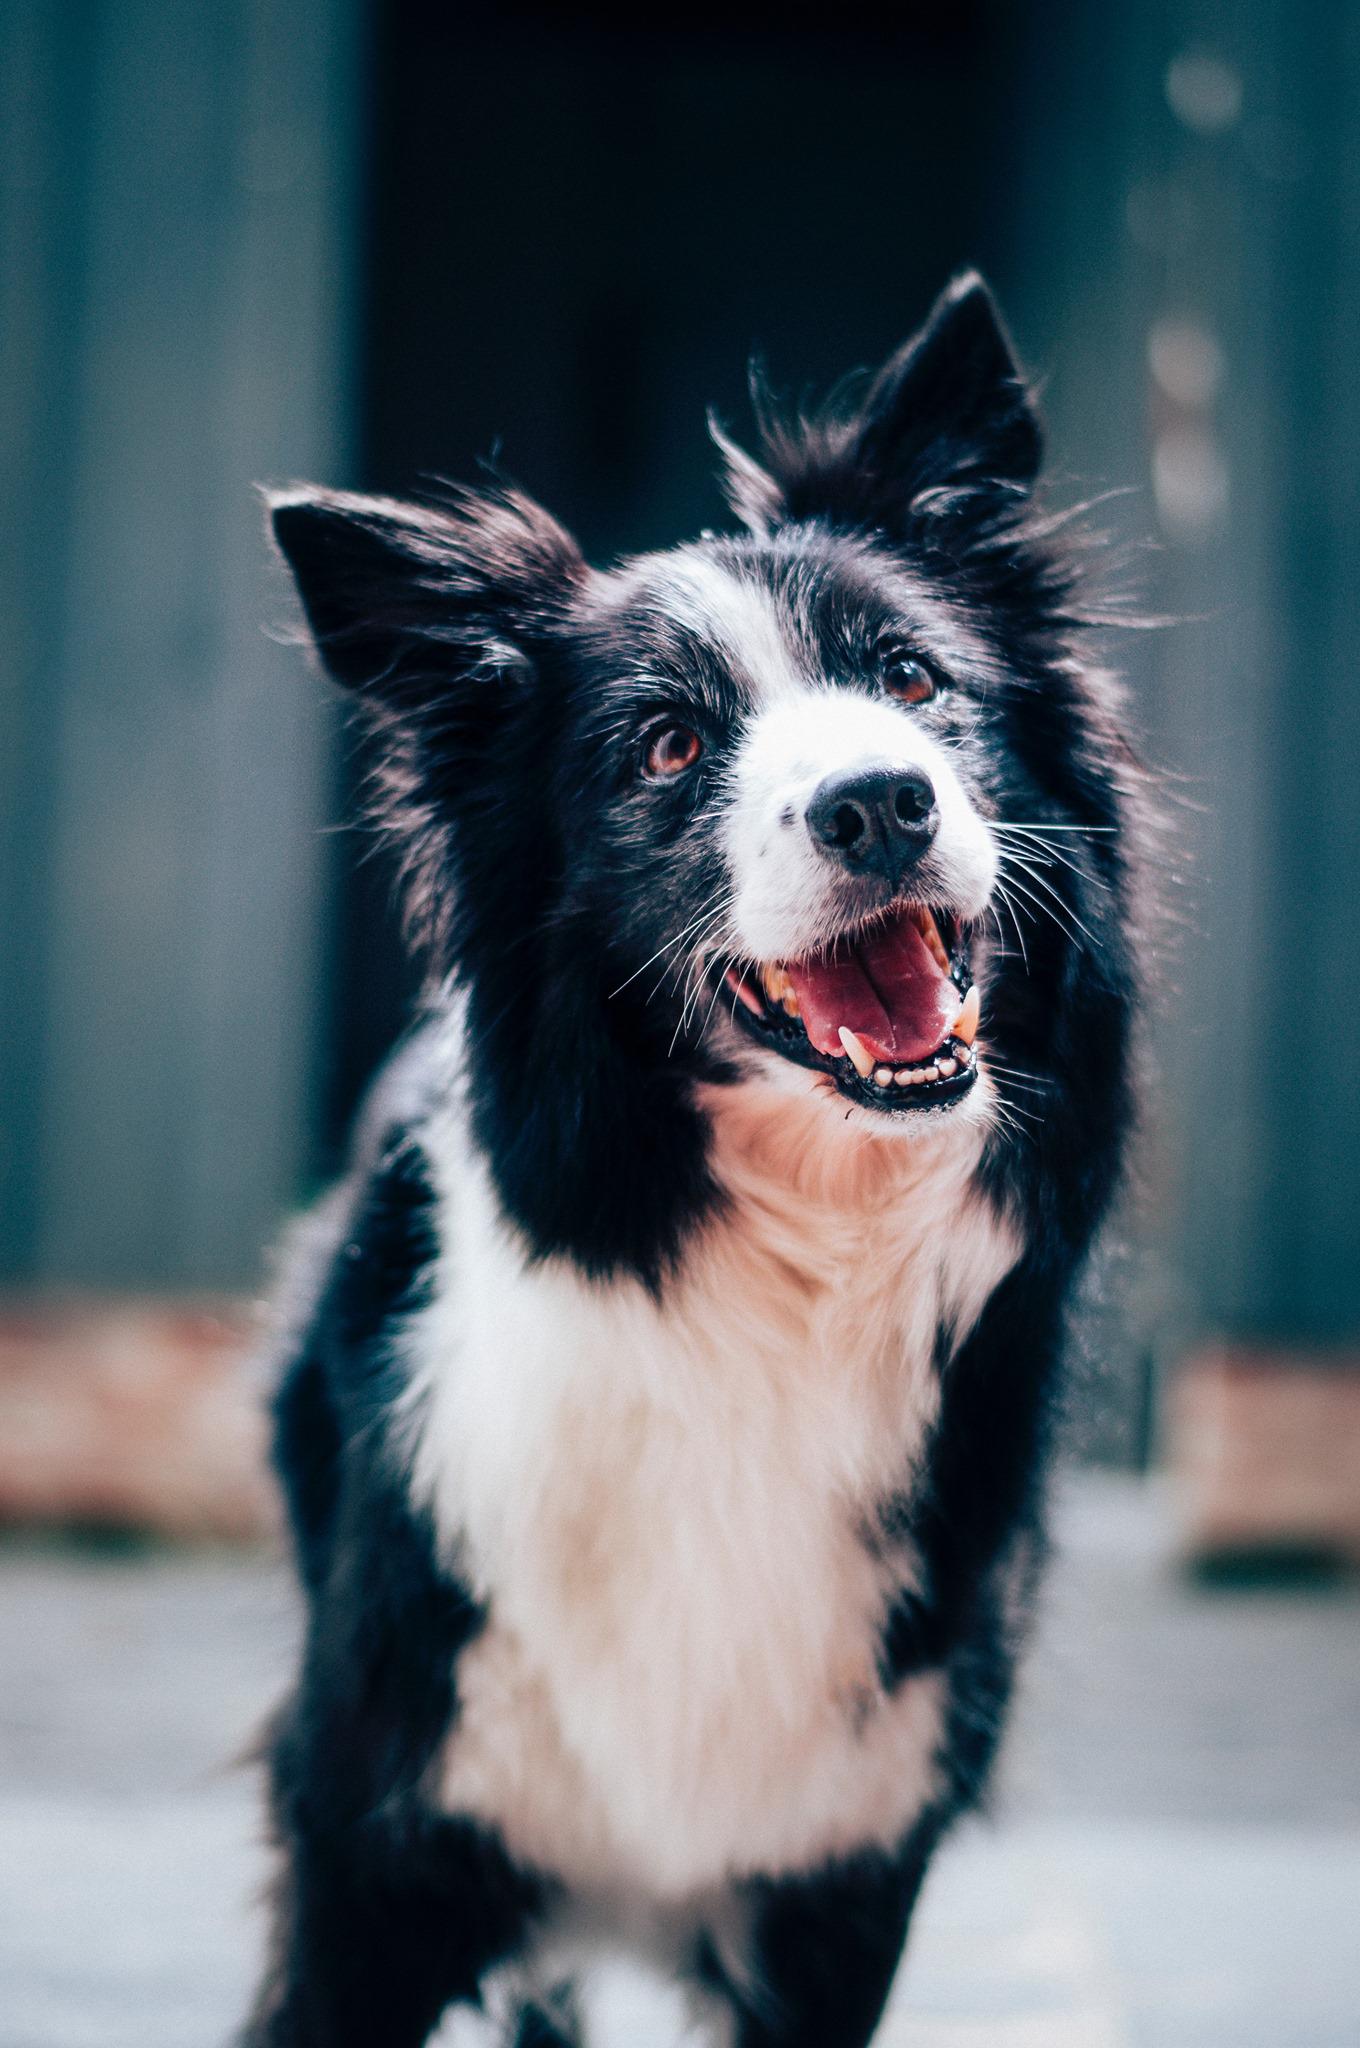 Does your pet need nutritional advice consultations? Woof Gang Bakery and Grooming Wichita provide access to organic, premium,and raw diets, and a wide range of holistic supplements for companion animals.